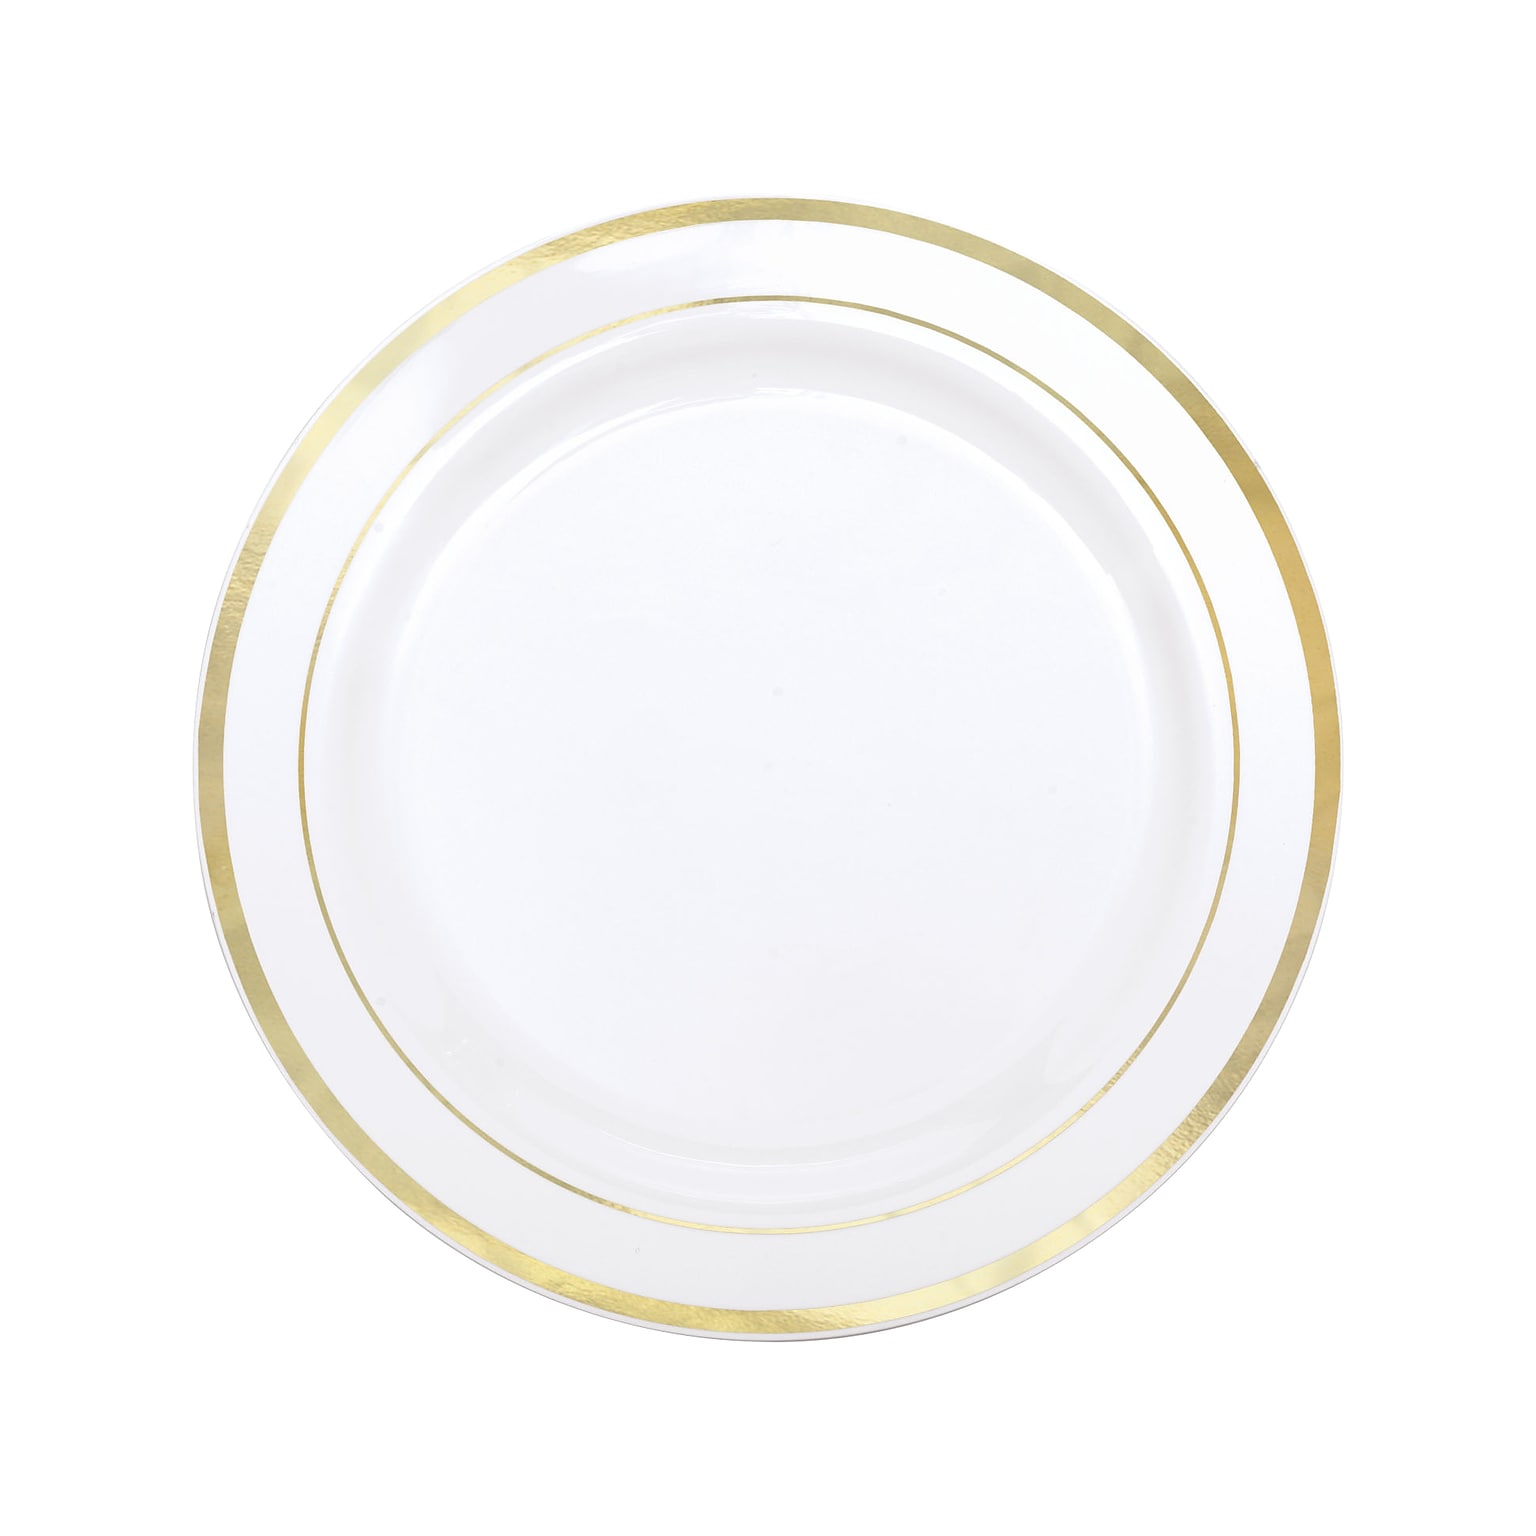 Amscan Premium Party Plate, White with Gold Trim (438986)